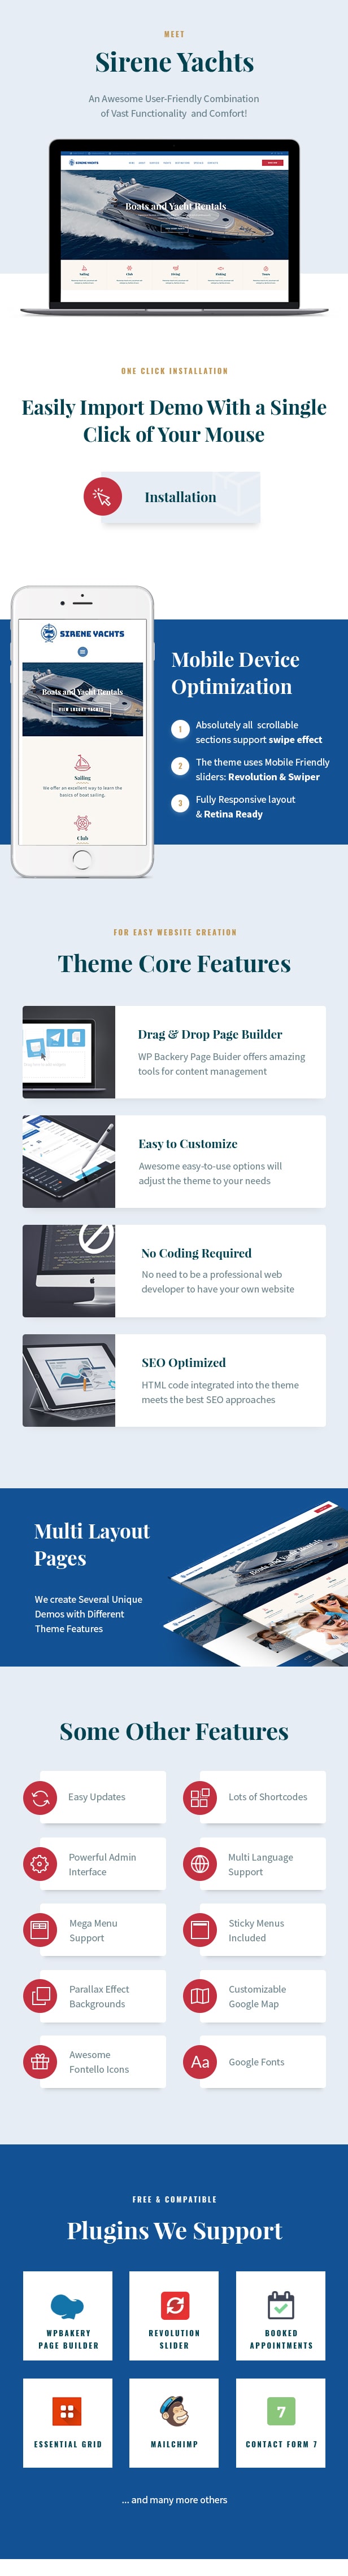 Yacht Charter Services & Boat Rental WordPress Theme features